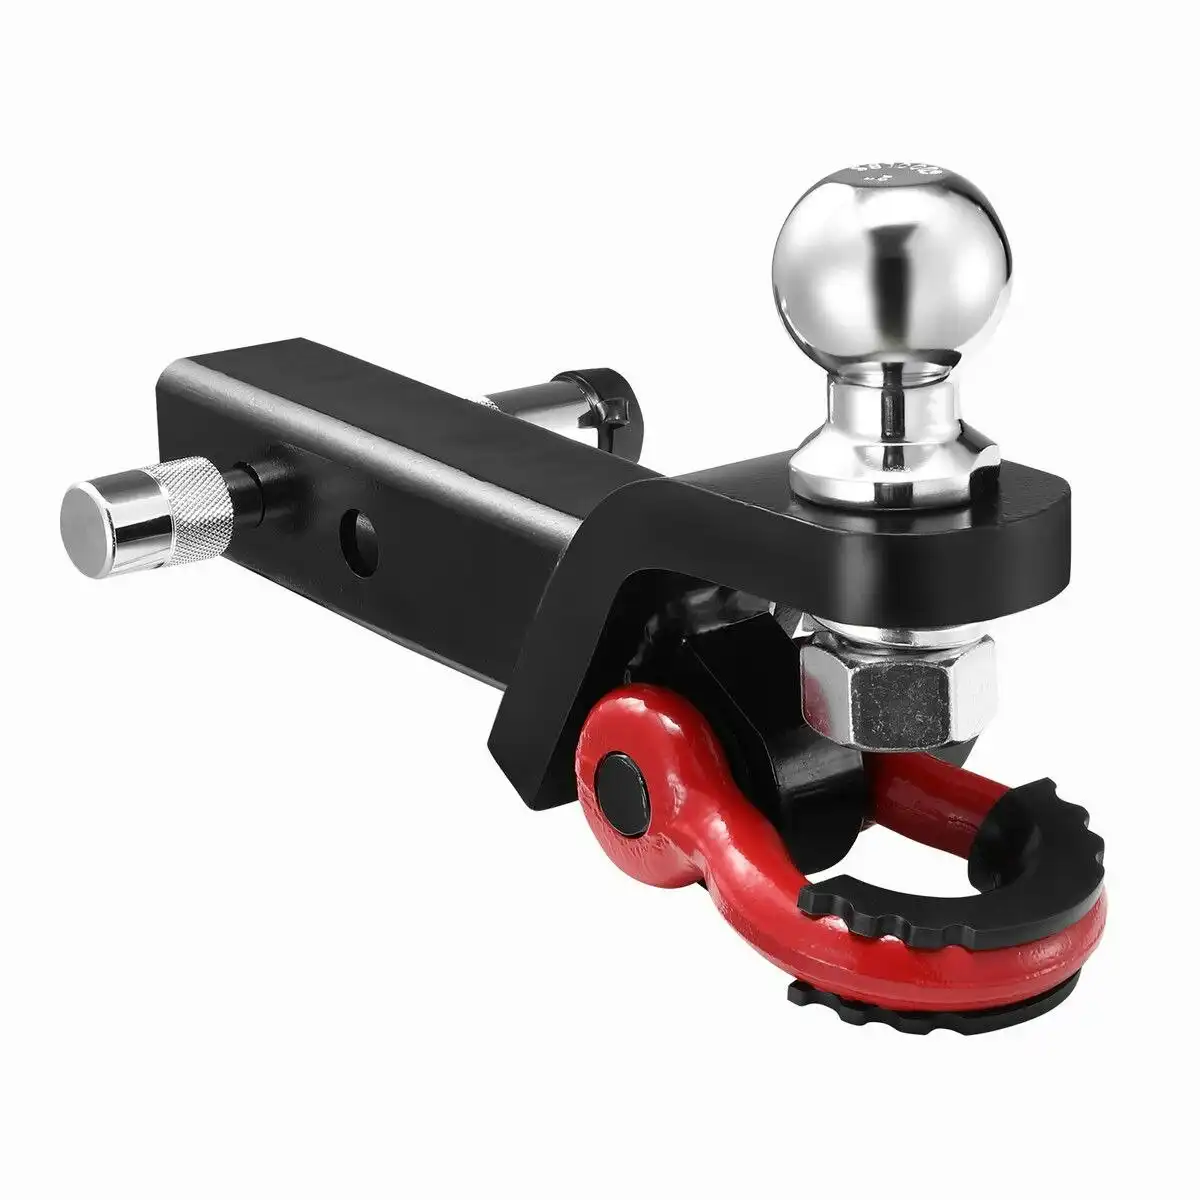 Ausway 2 in 1 Tow Bar Car Caravan Boat Vehicle Heavy Duty Towing Ball Mount Tongue Shackle Trailer Hitch Receiver 4350kg 4WD